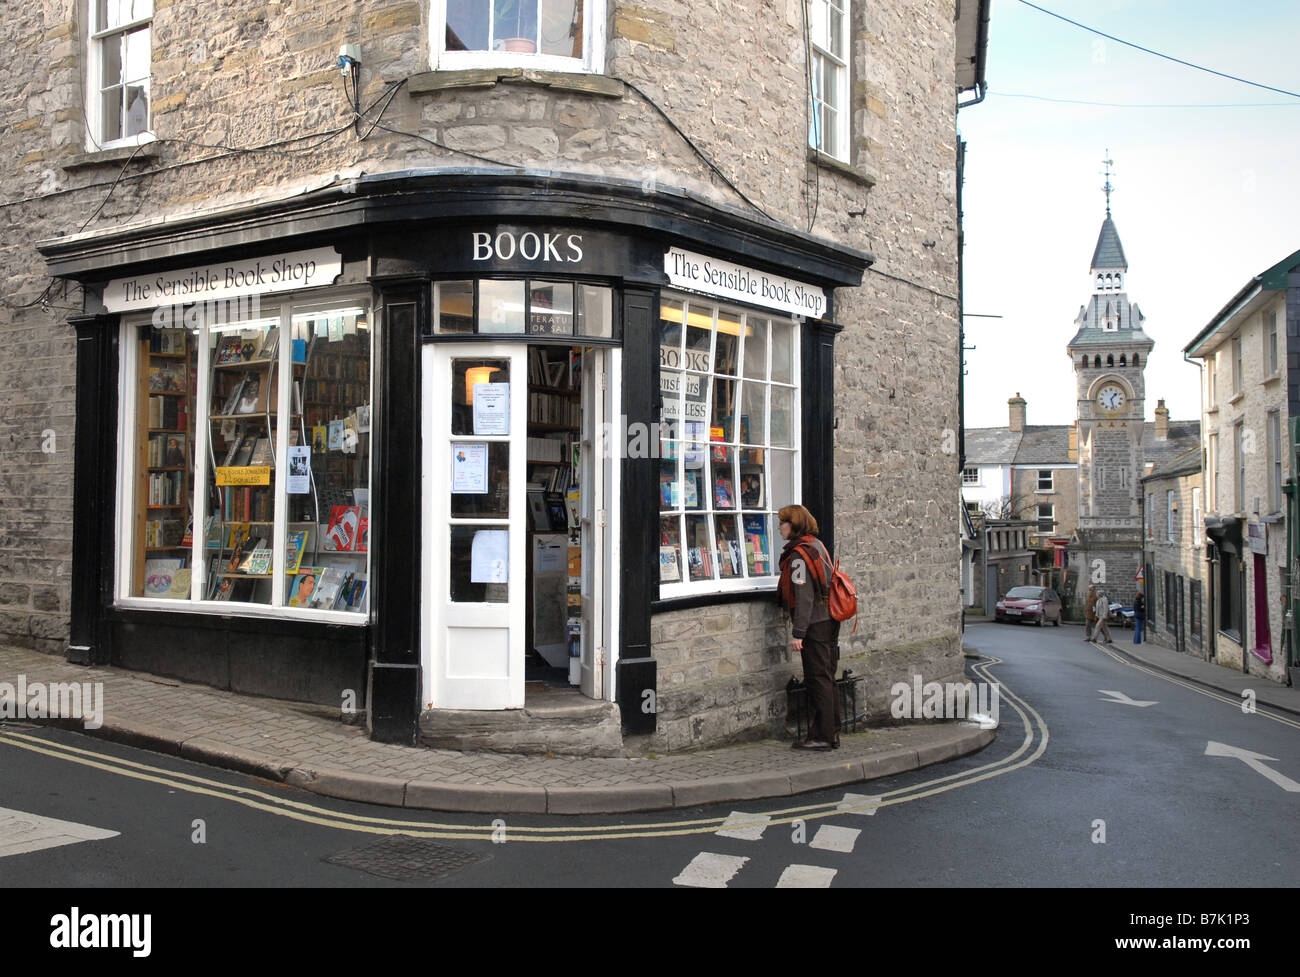 The Sensible Book Shop in Hay on Wye Herefordshire Stock Photo